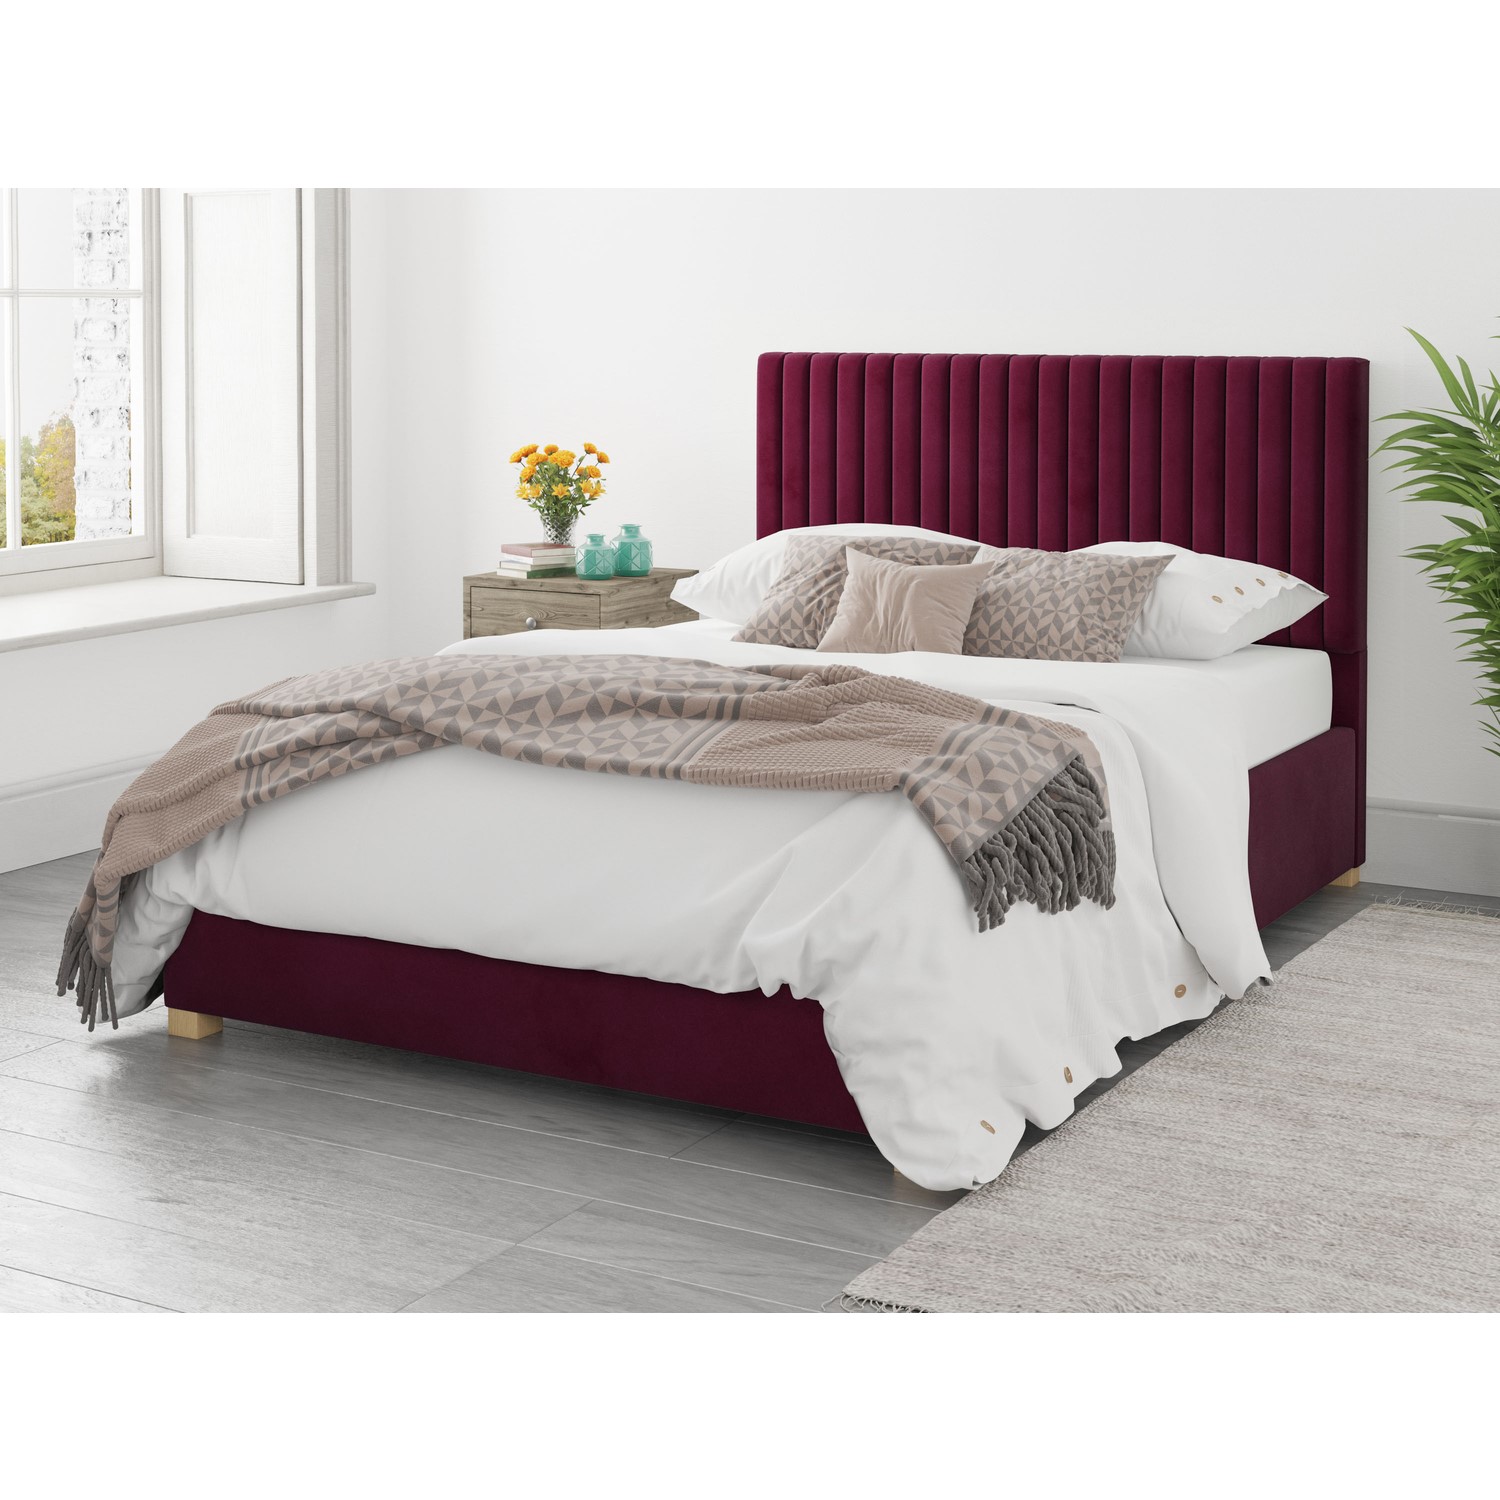 Read more about Berry red velvet double ottoman bed piccadilly aspire